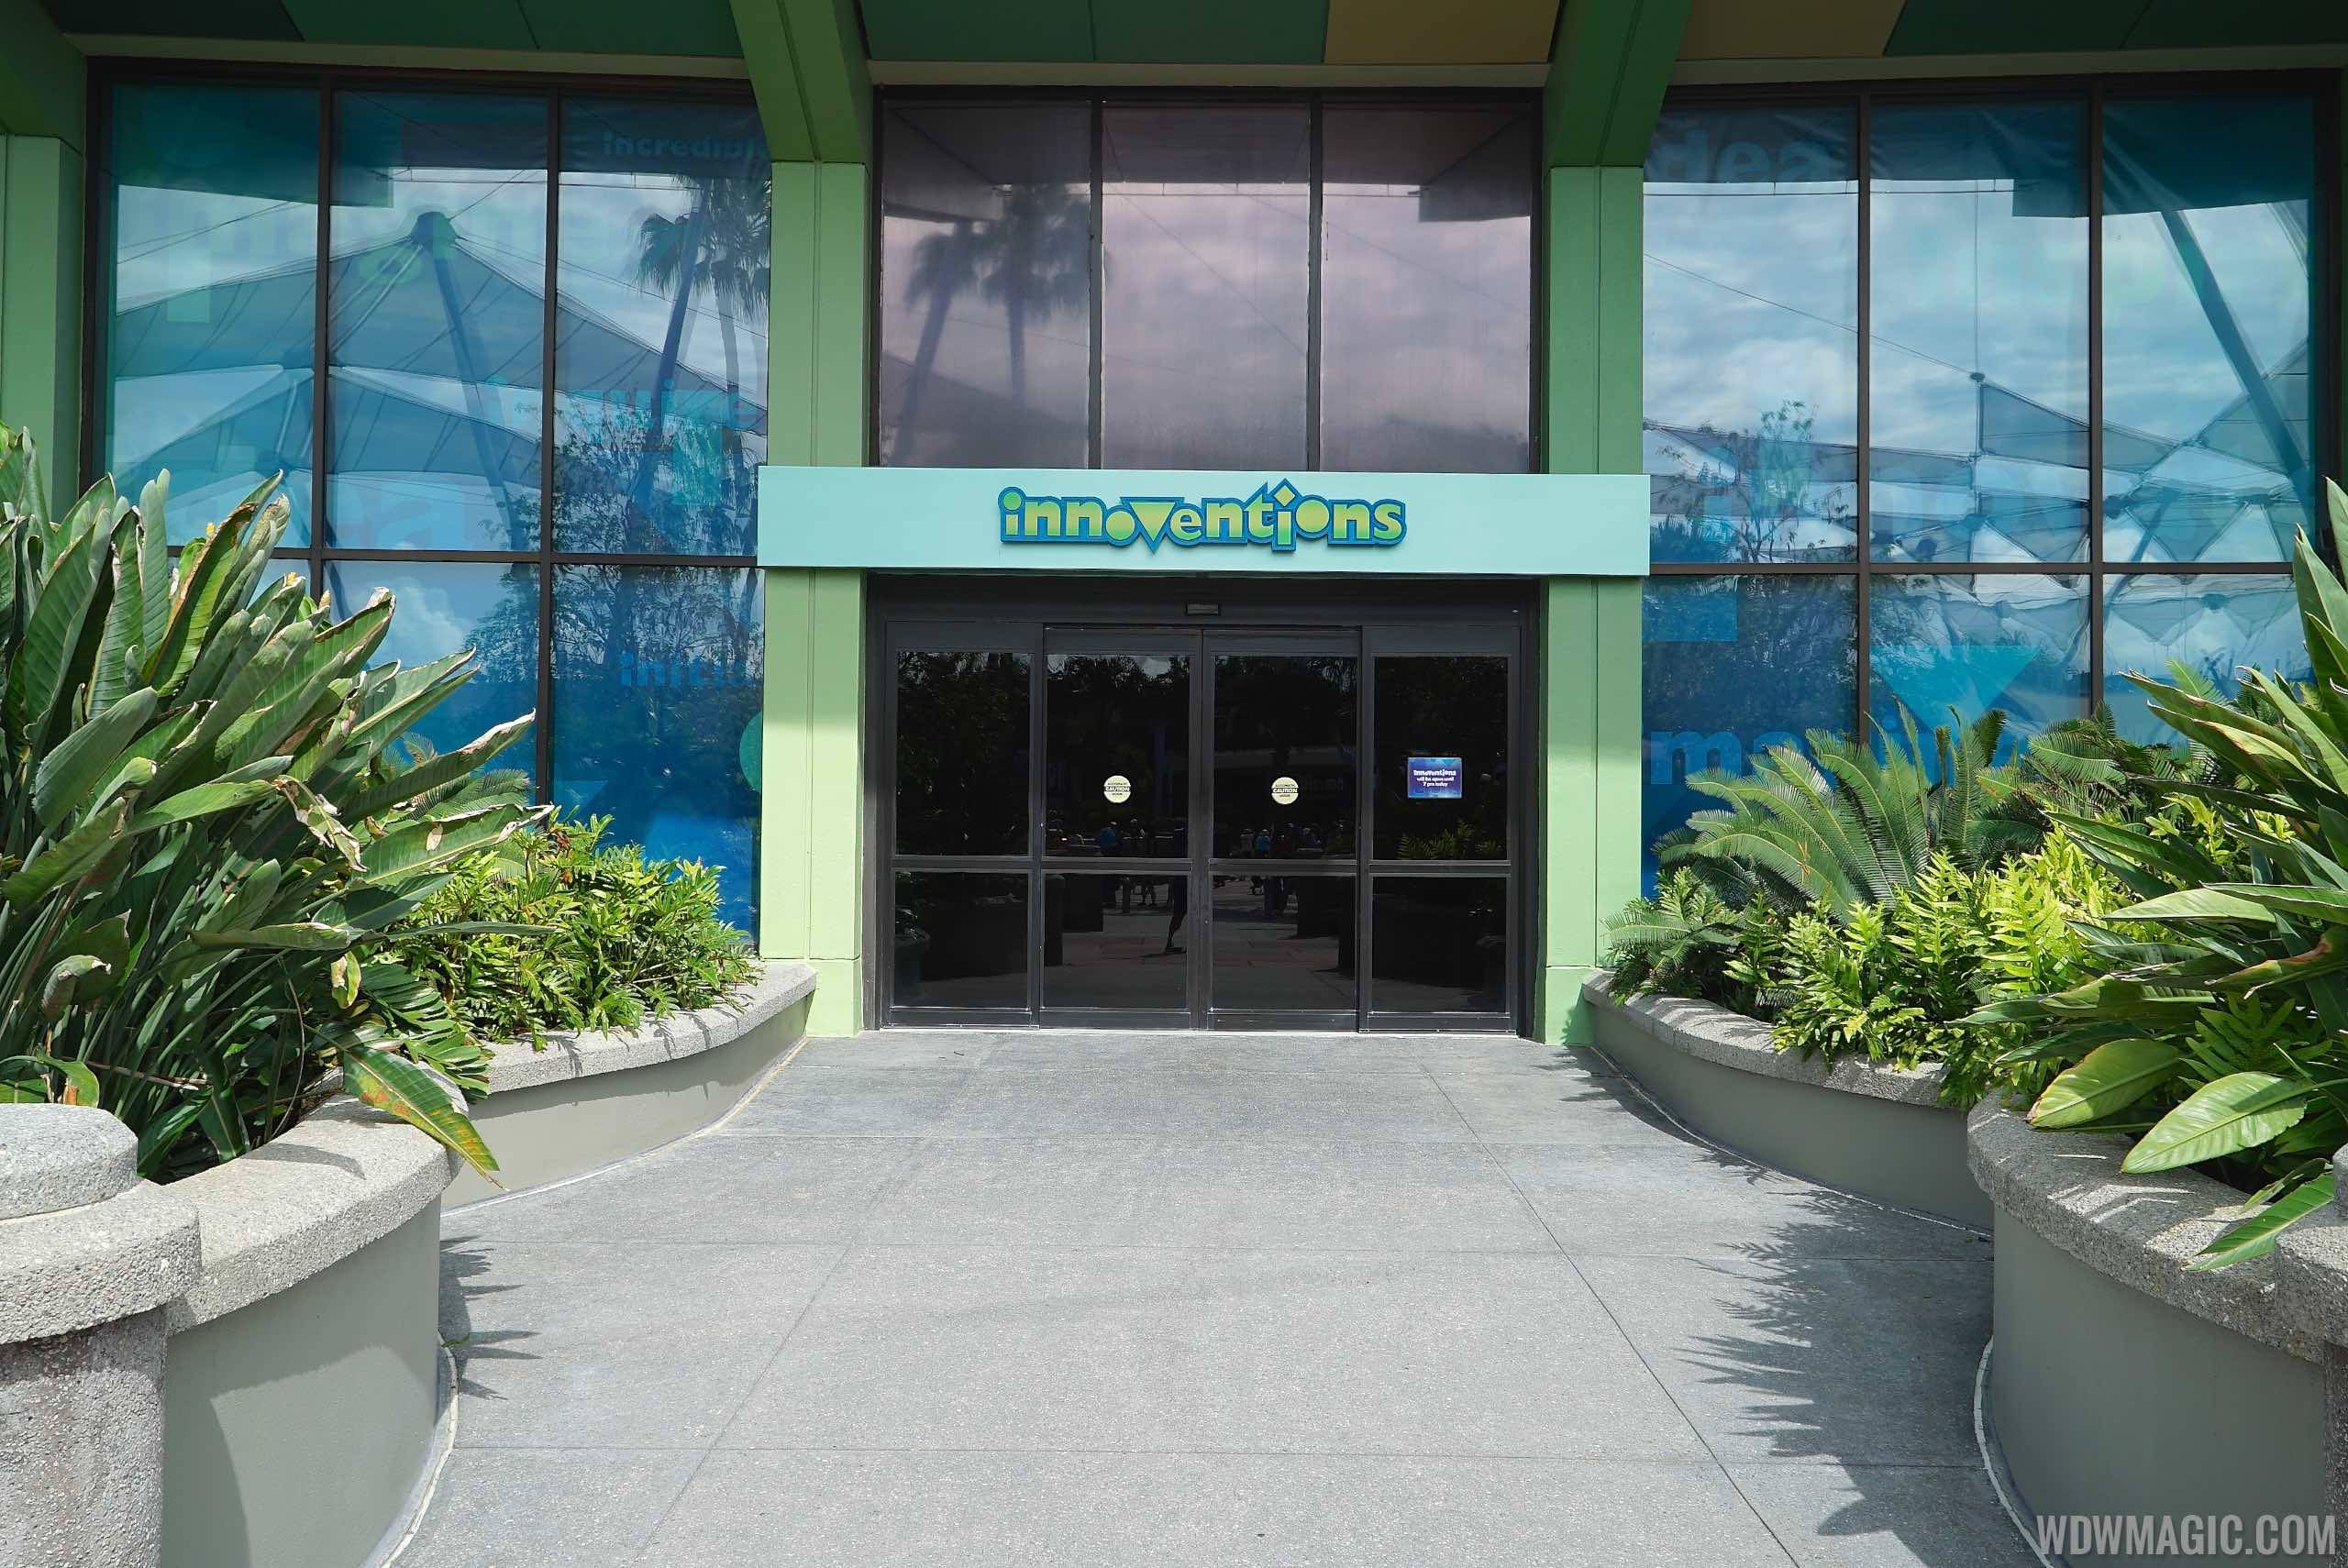 Epcot's Innoventions West to close by the summer?